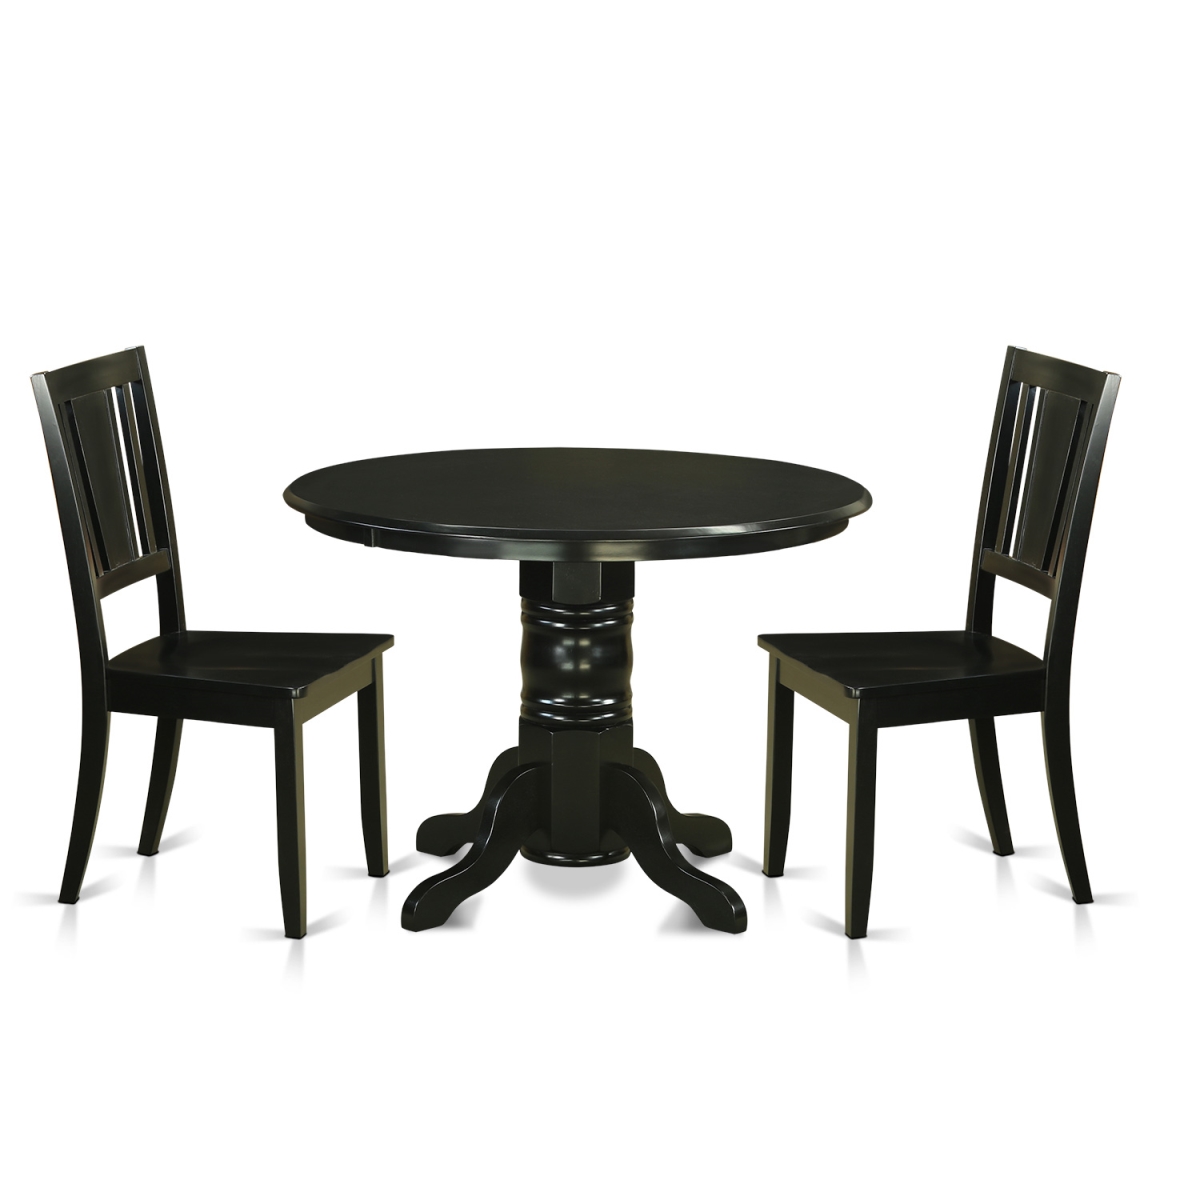 Dinette Set With 2 Kitchen Table & 2 Chairs, Black - 3 Piece